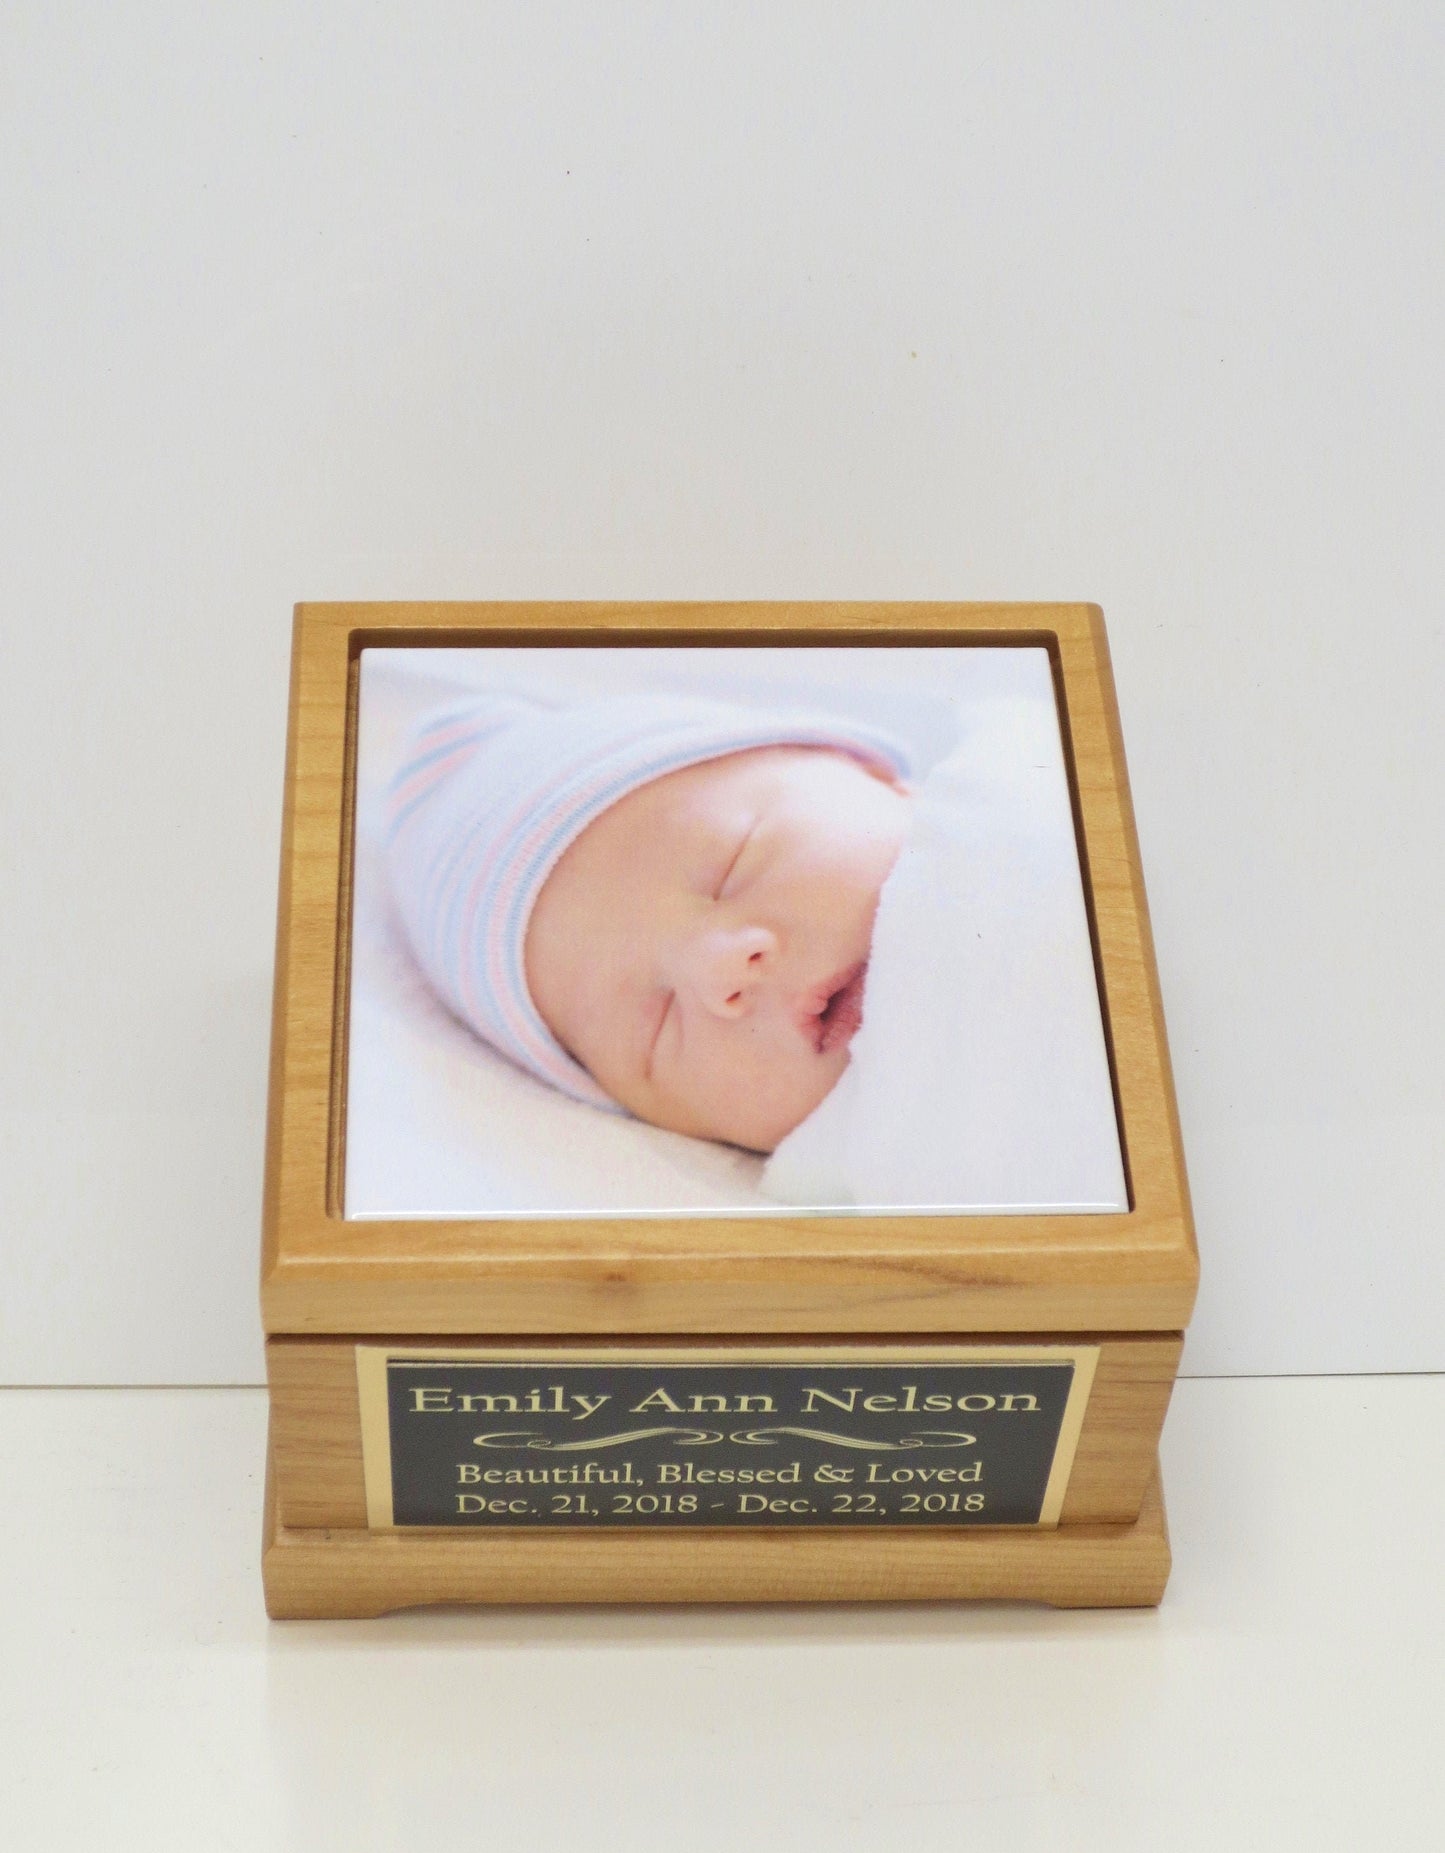 Baby Photo Urn For Ashes Infant Child Urn Baby Cremation Memorial Human Tile Photo & Personalized Engraved Tag Memorial Keepsake To 25 lbs